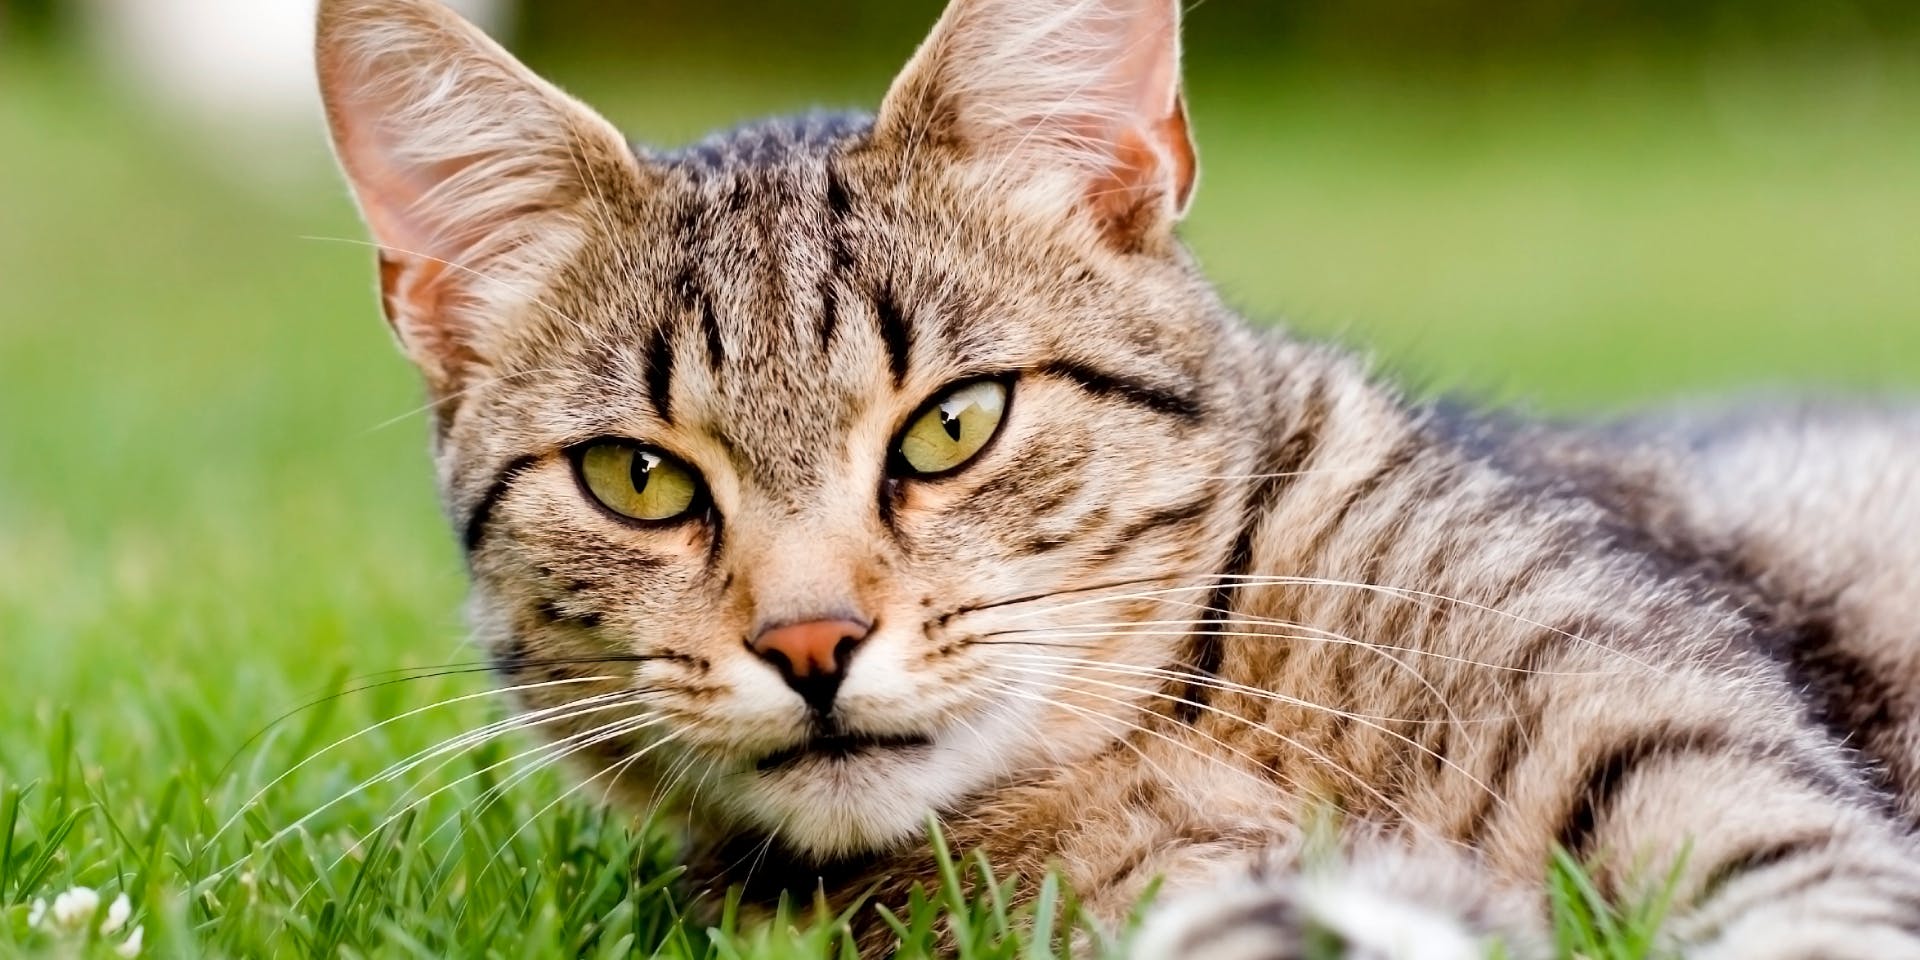 A tabby cat lying on the grass.